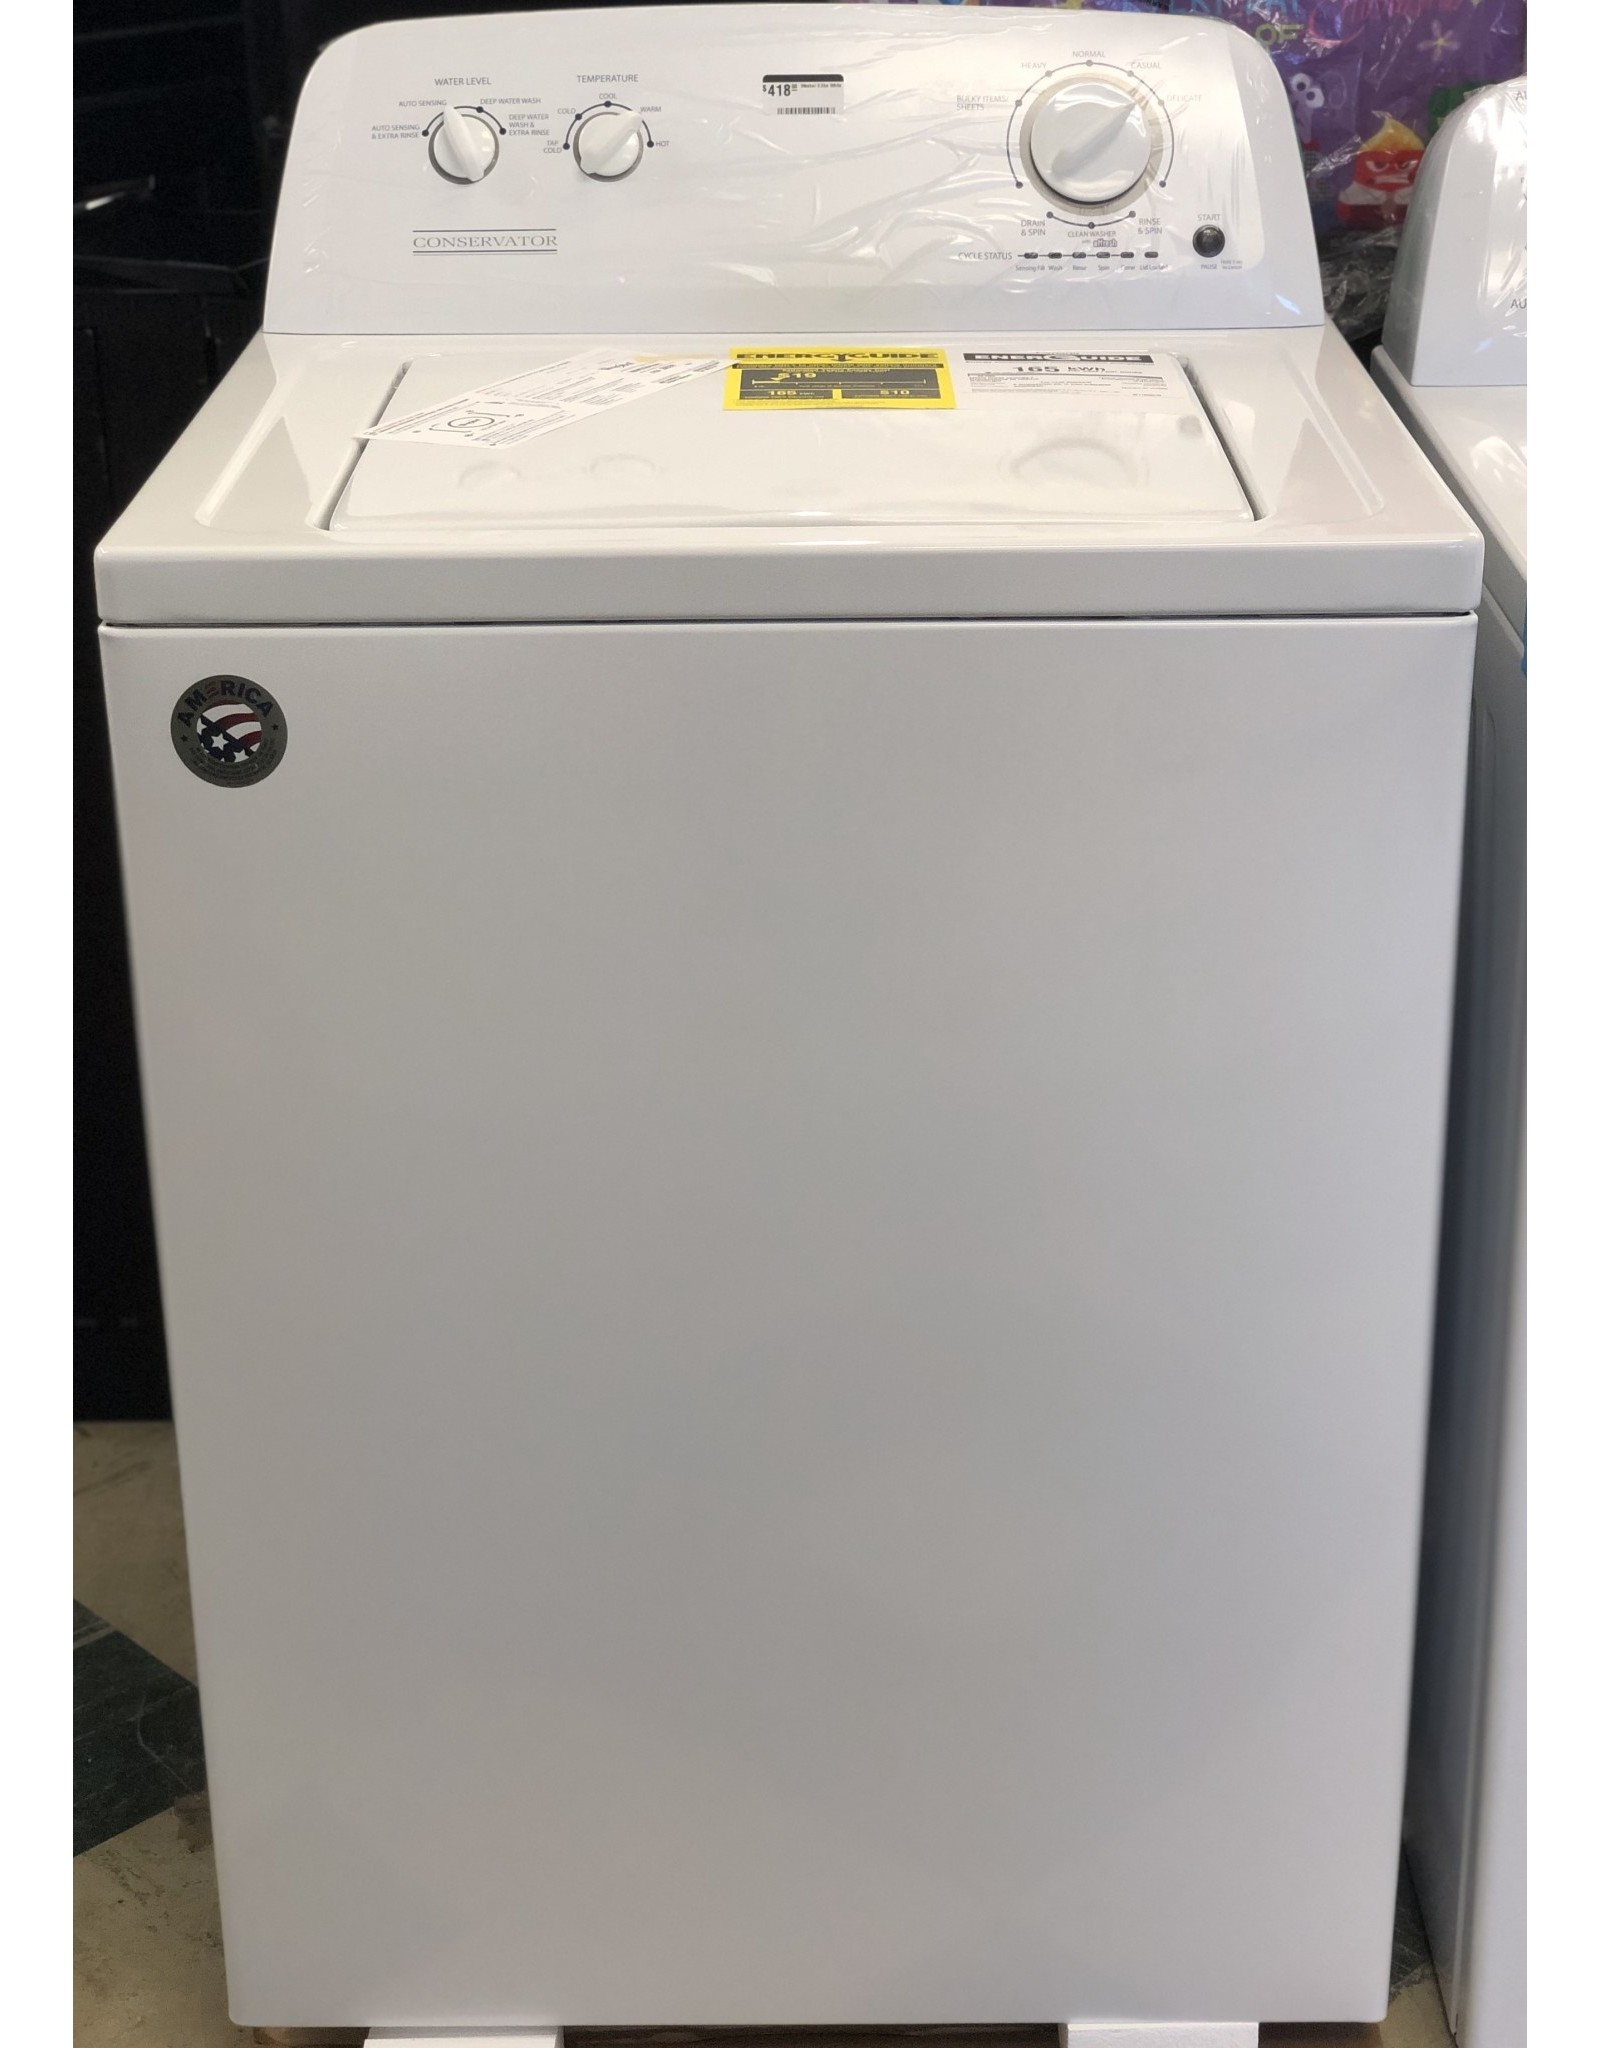 Whirlpool Hotpoint/Conservator 3.5 cu.ft Washer